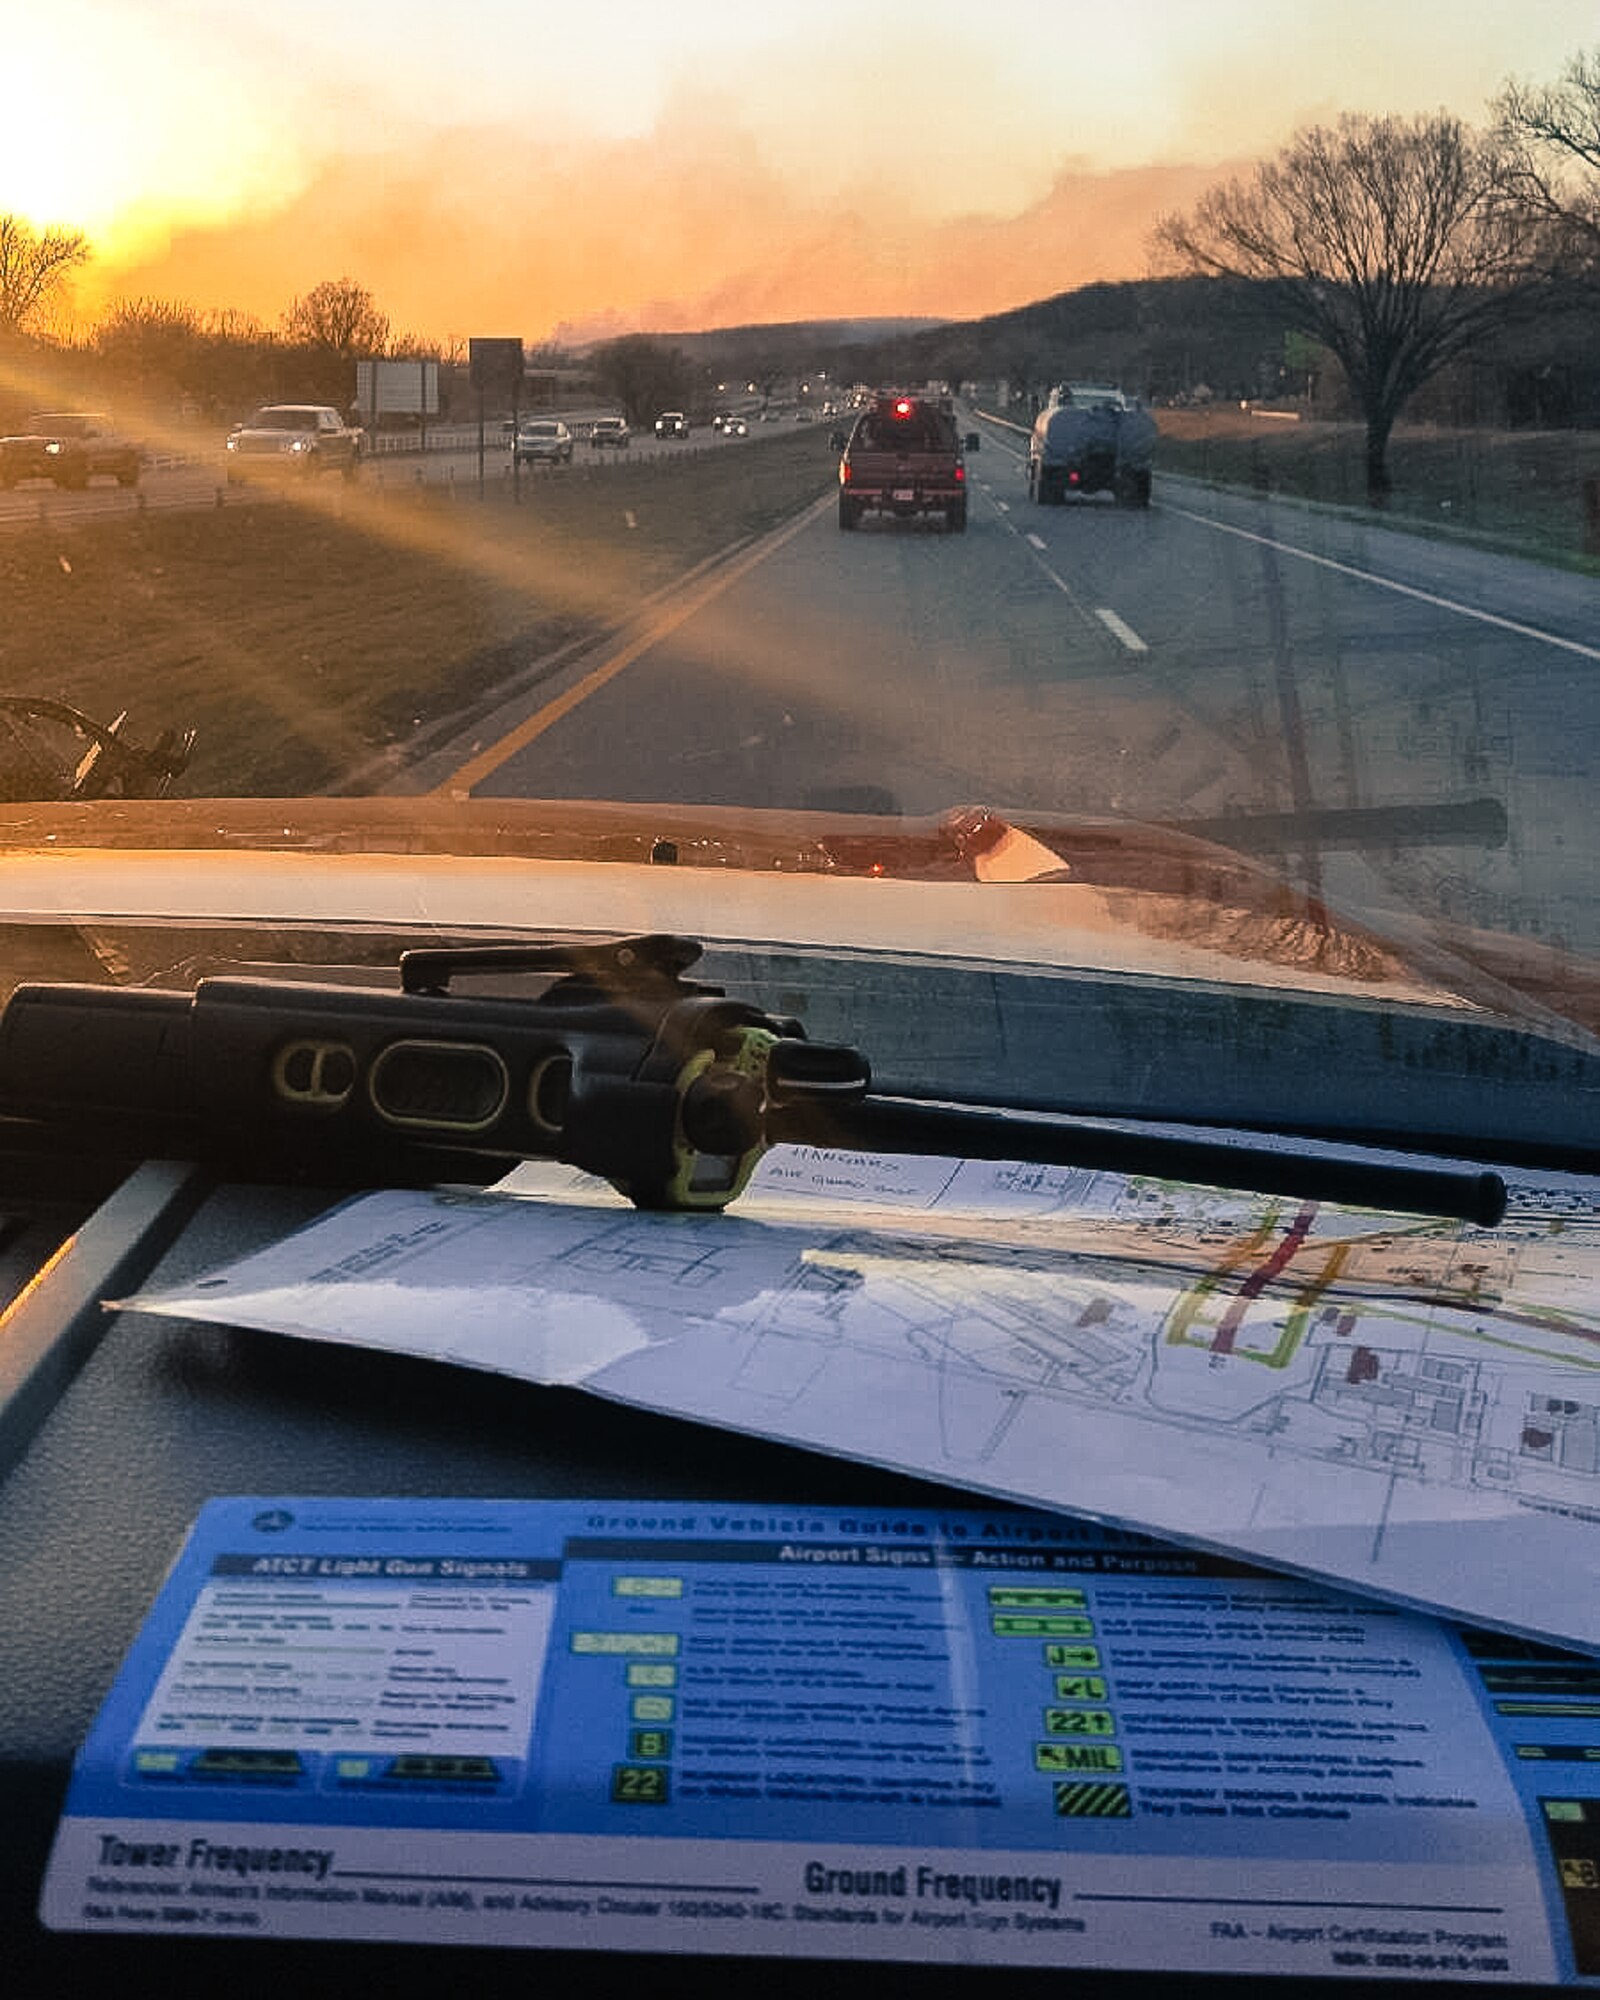 Captain Sean Edwards, Firefighter, 138th Fighter Wing, captures image of wildfires while in transit to the Tulsa Area Firefighter’s Mutual Aid (TAFMA) Task Force 1.